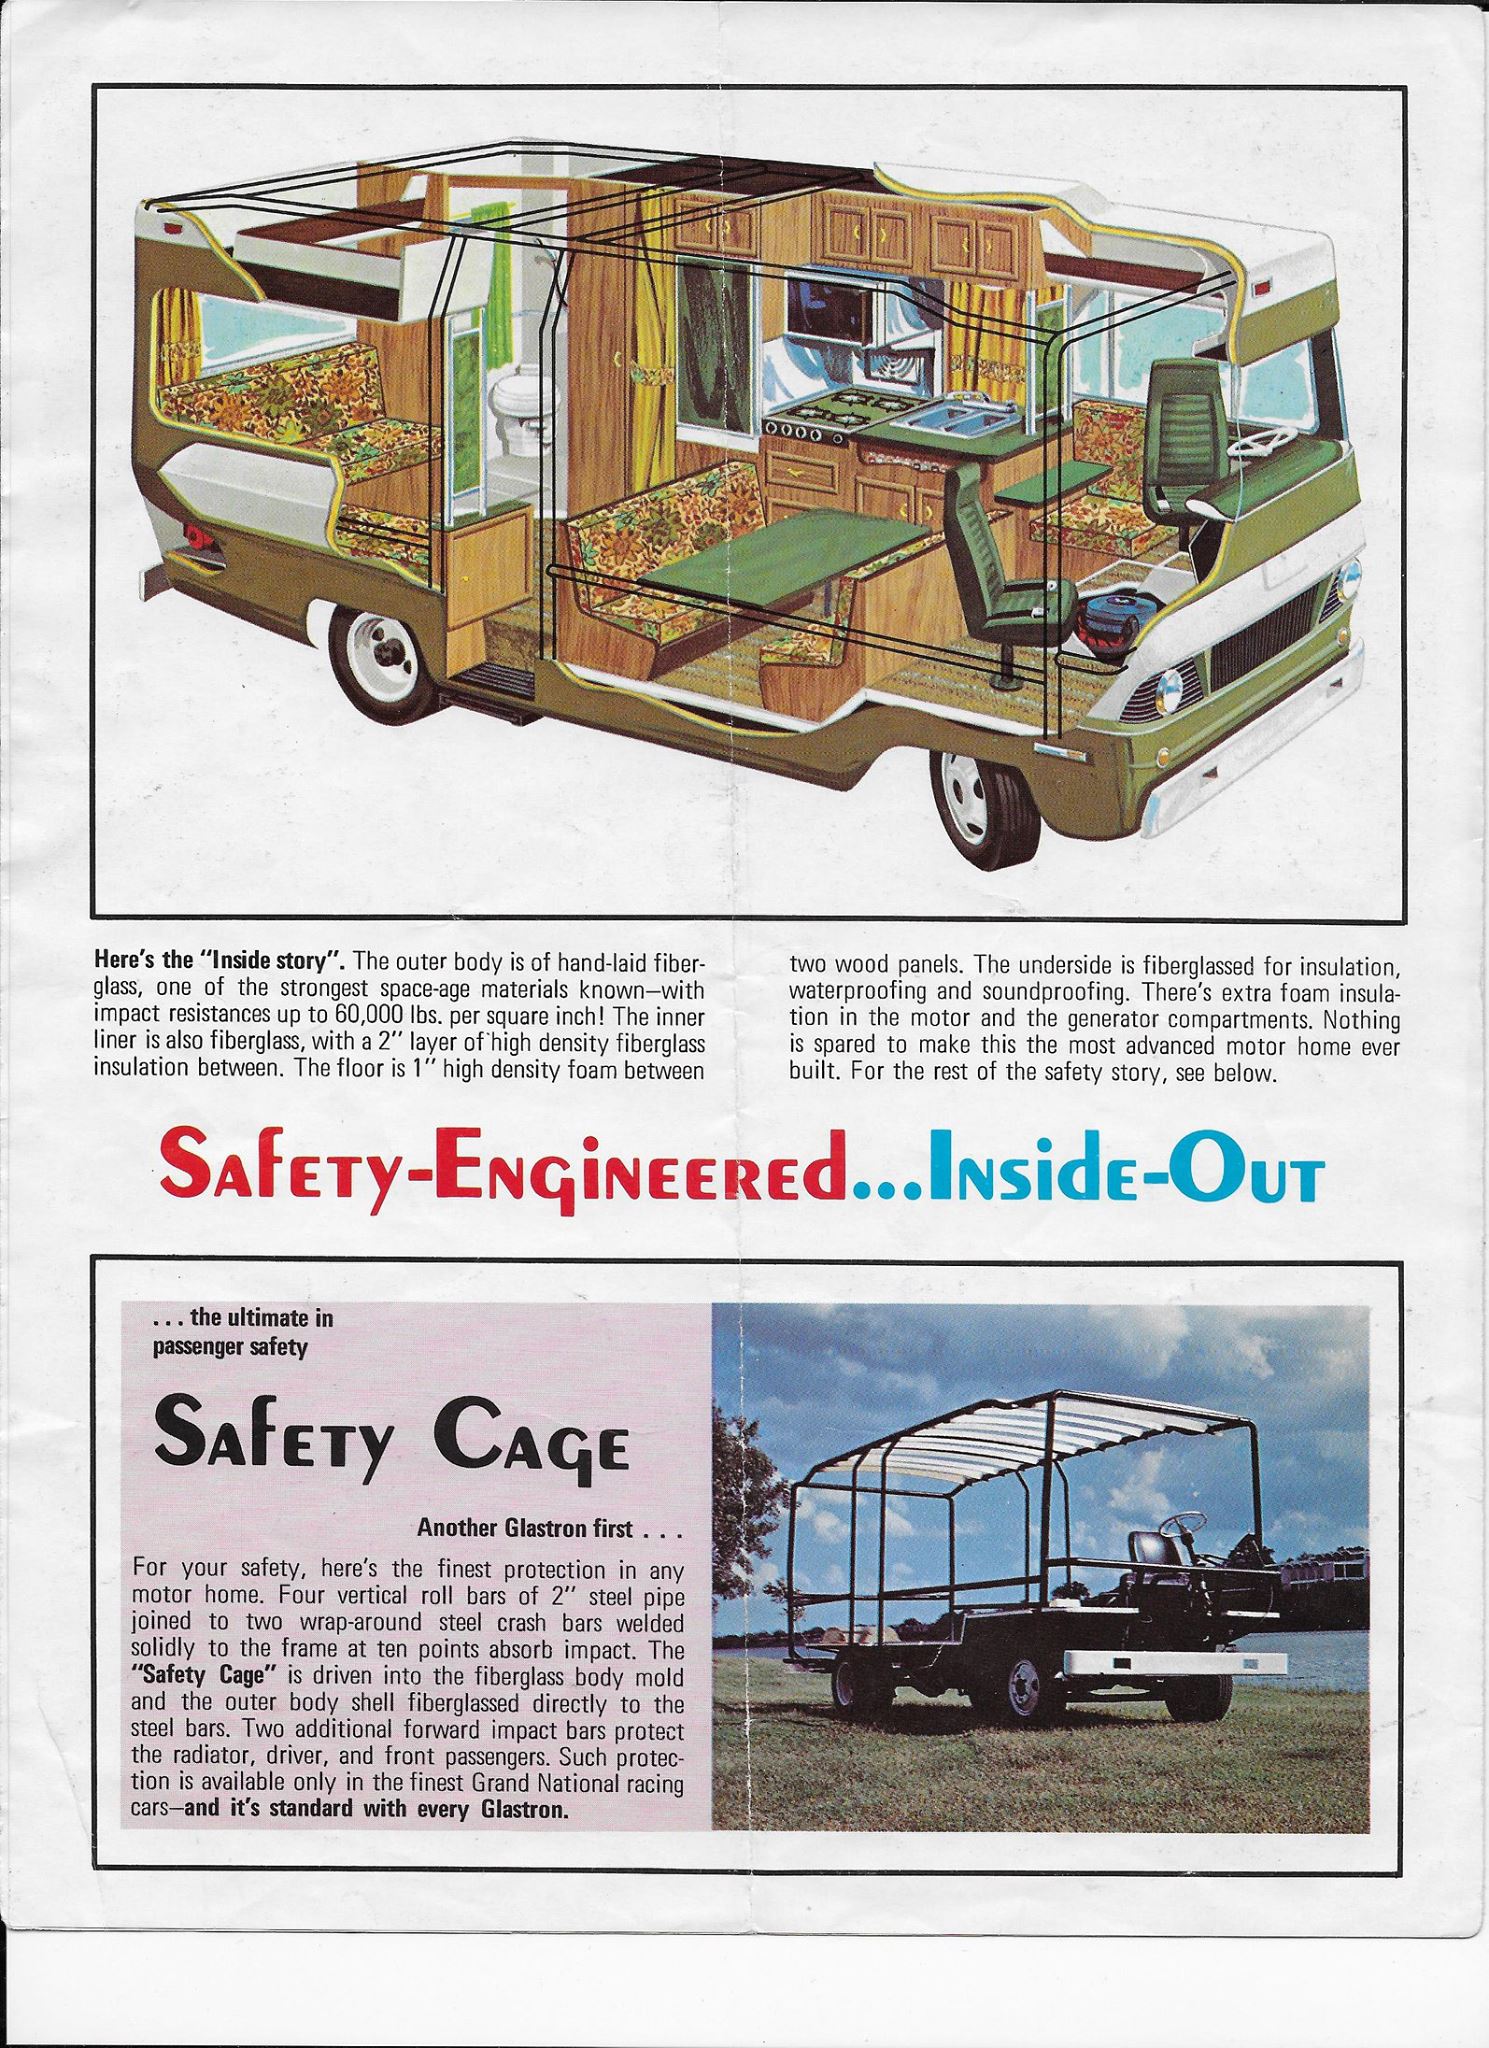 The ‘60s Glastron Motorhome: A “Space-Age” Fiberglass RV with ...